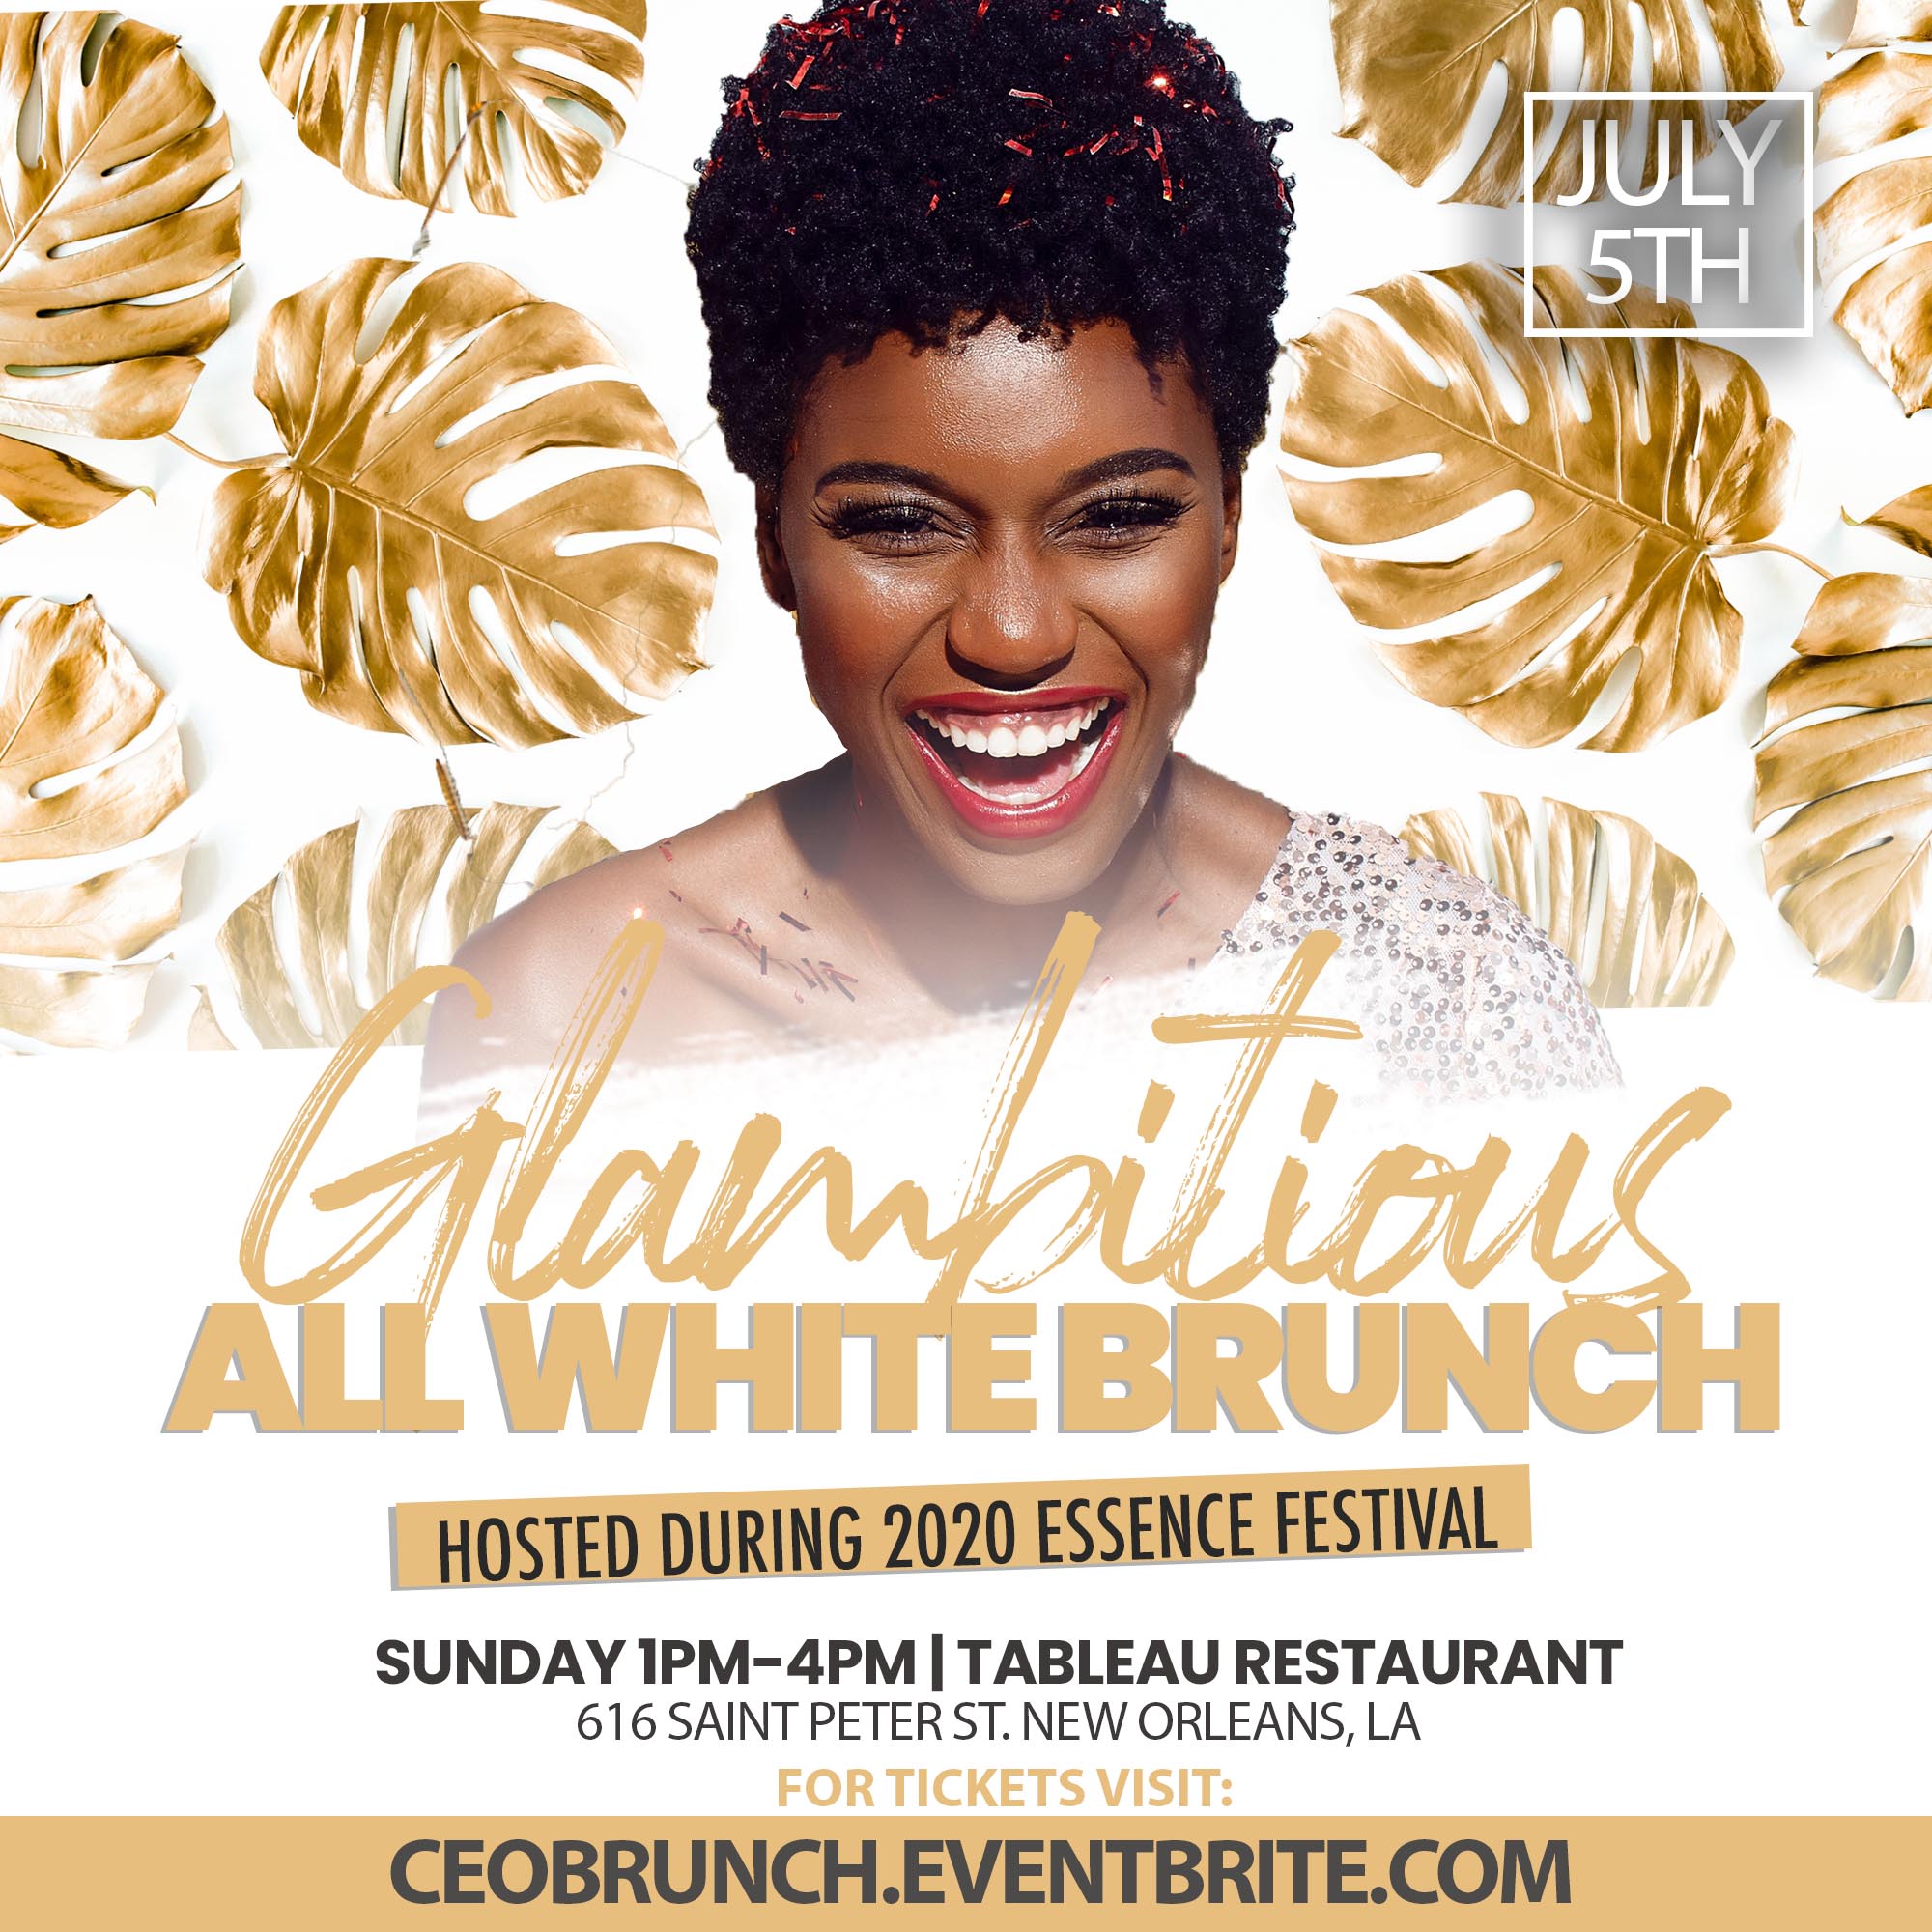 SUNDAY Glambitious All White Brunch (Essence Festival 2020) Tickets